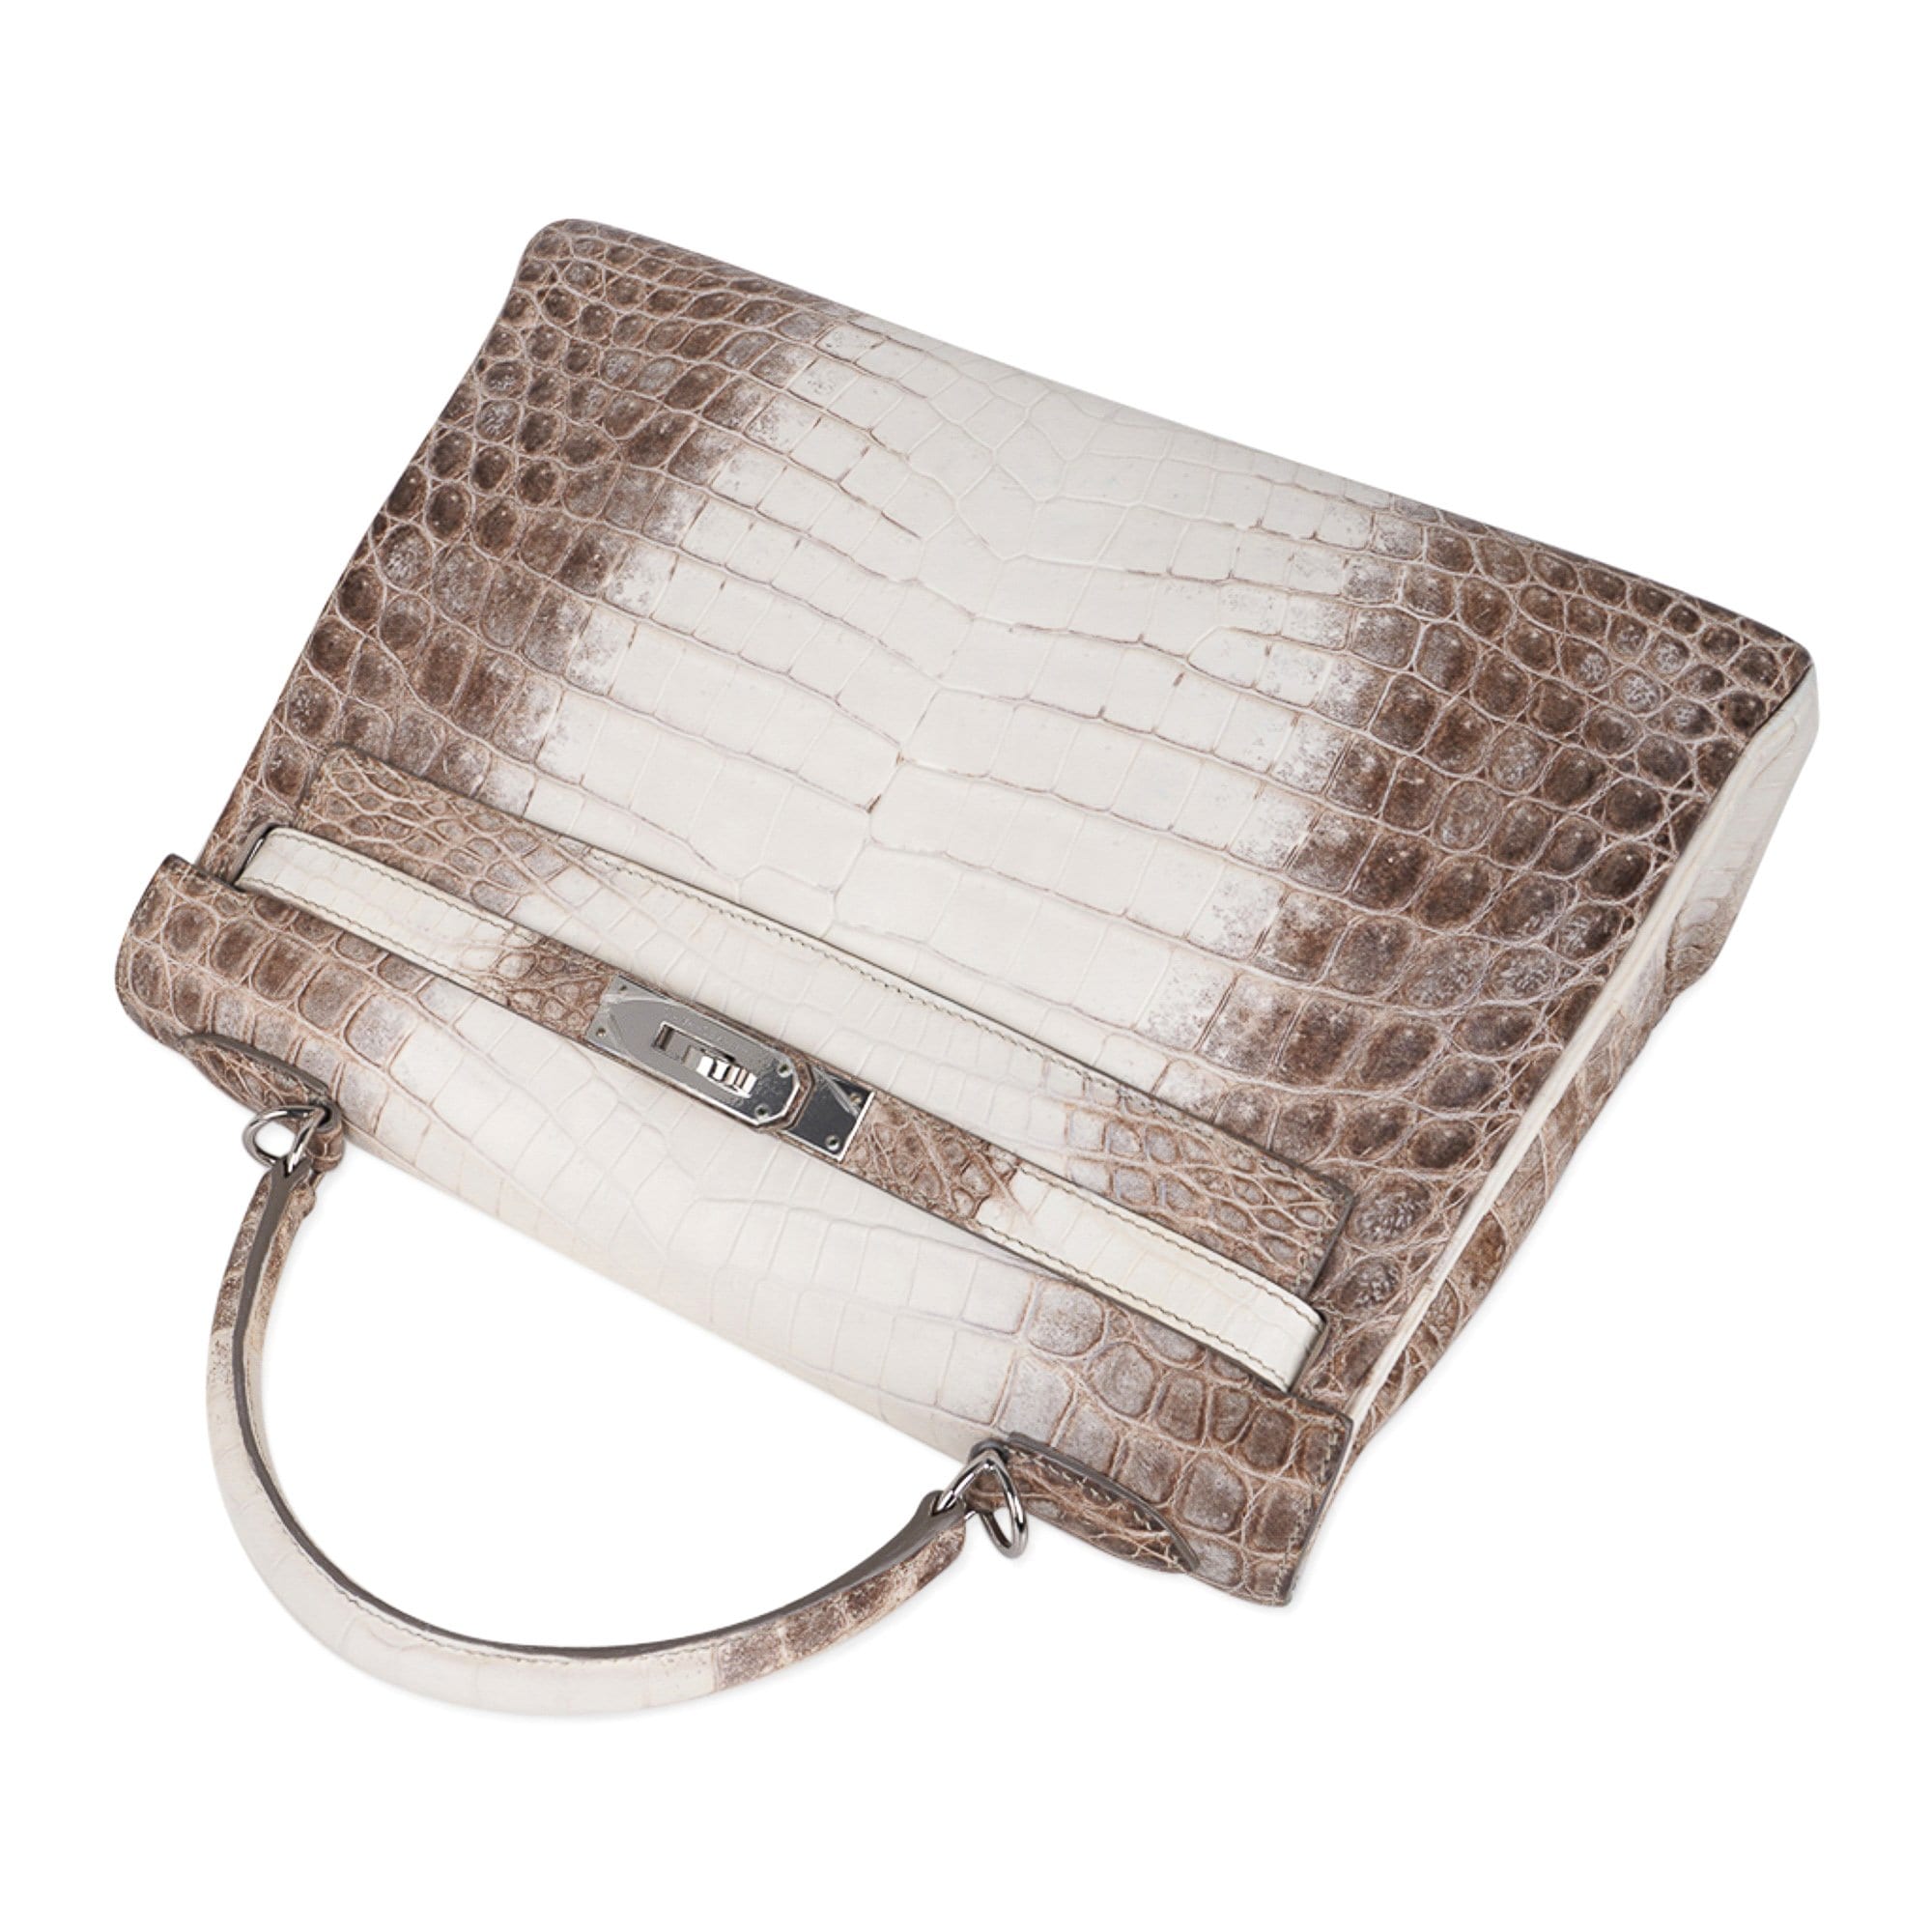 Hermes Limited Edition Kelly 32 Bag in Himalaya Crocodile with